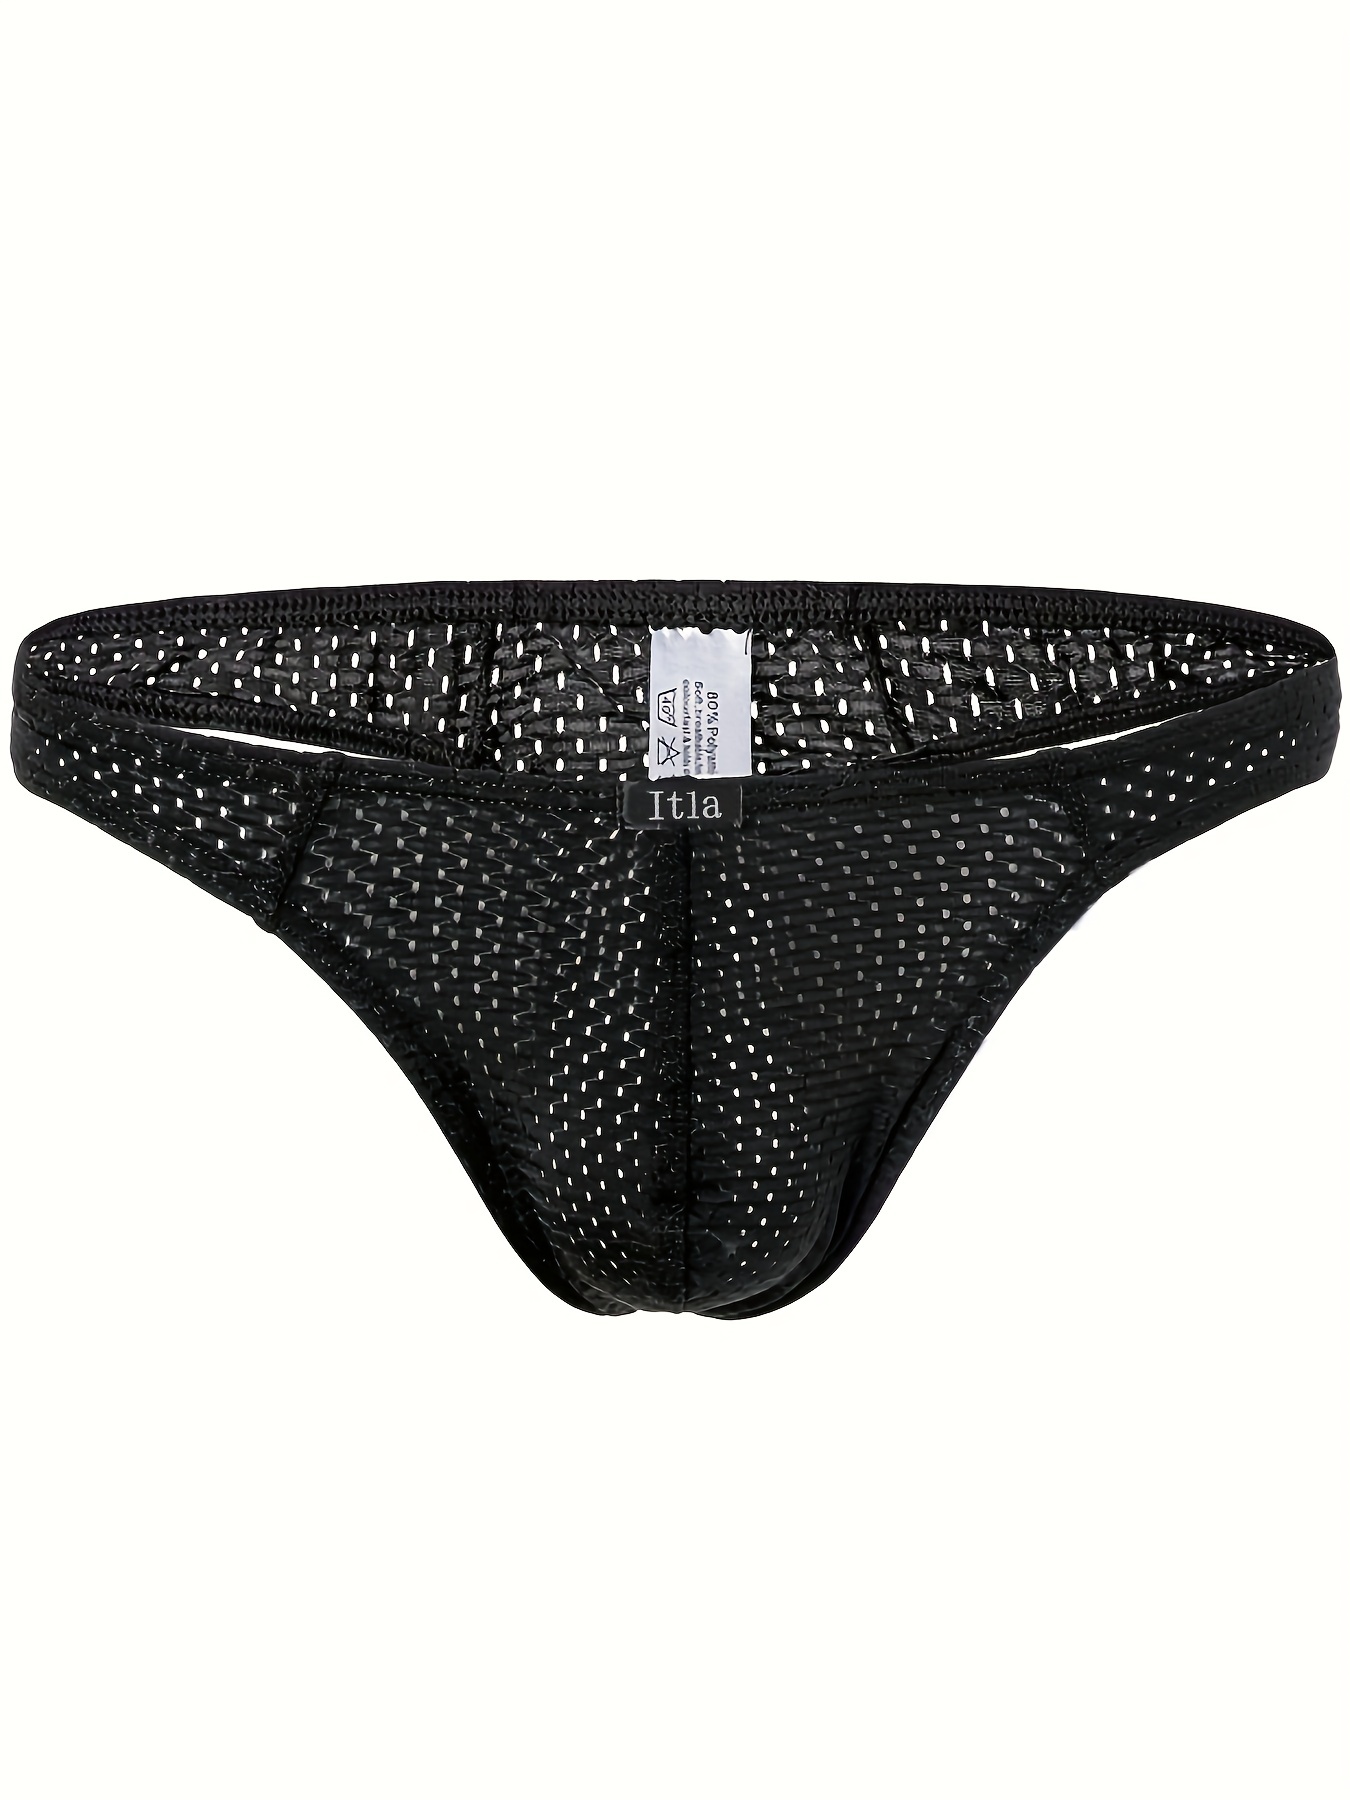 Men's Elephant Nose Shaped G-Strings & Thongs Delivery in Los